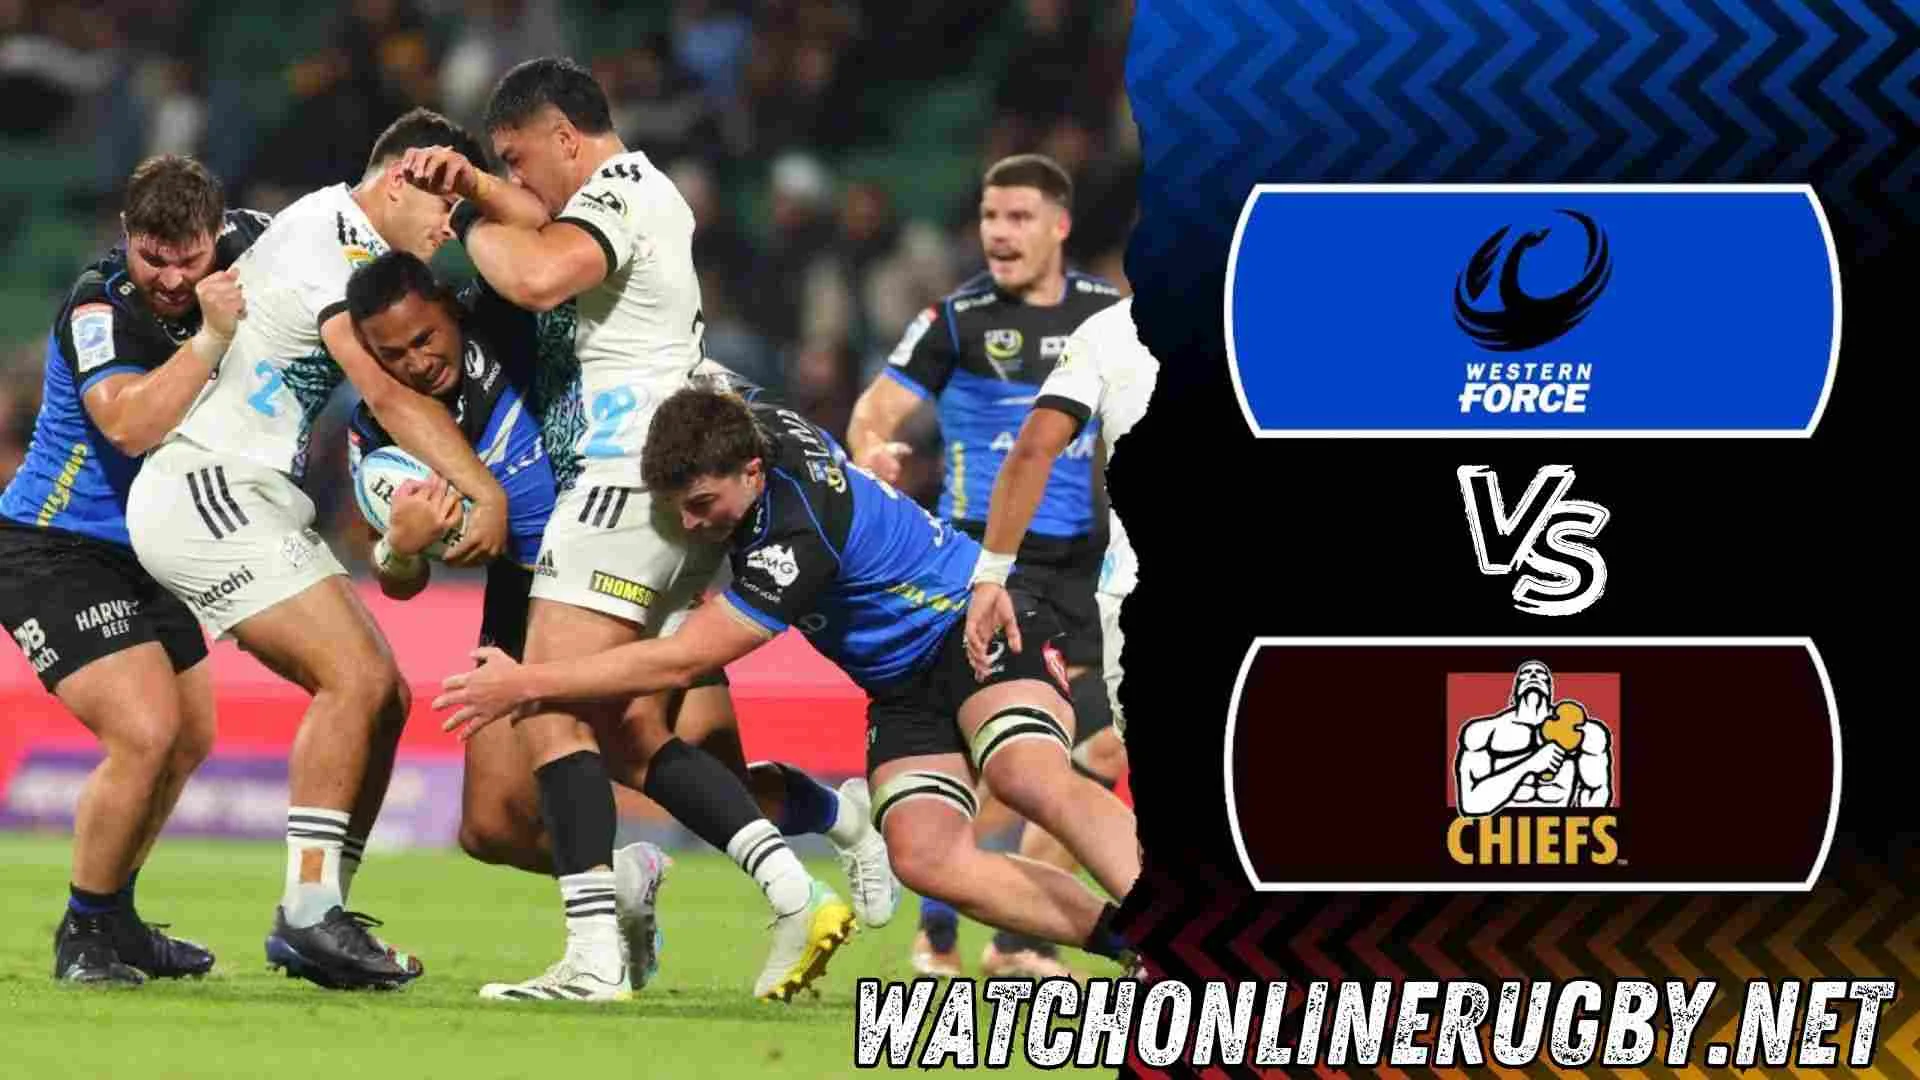 Force Vs Chiefs Live Streaming